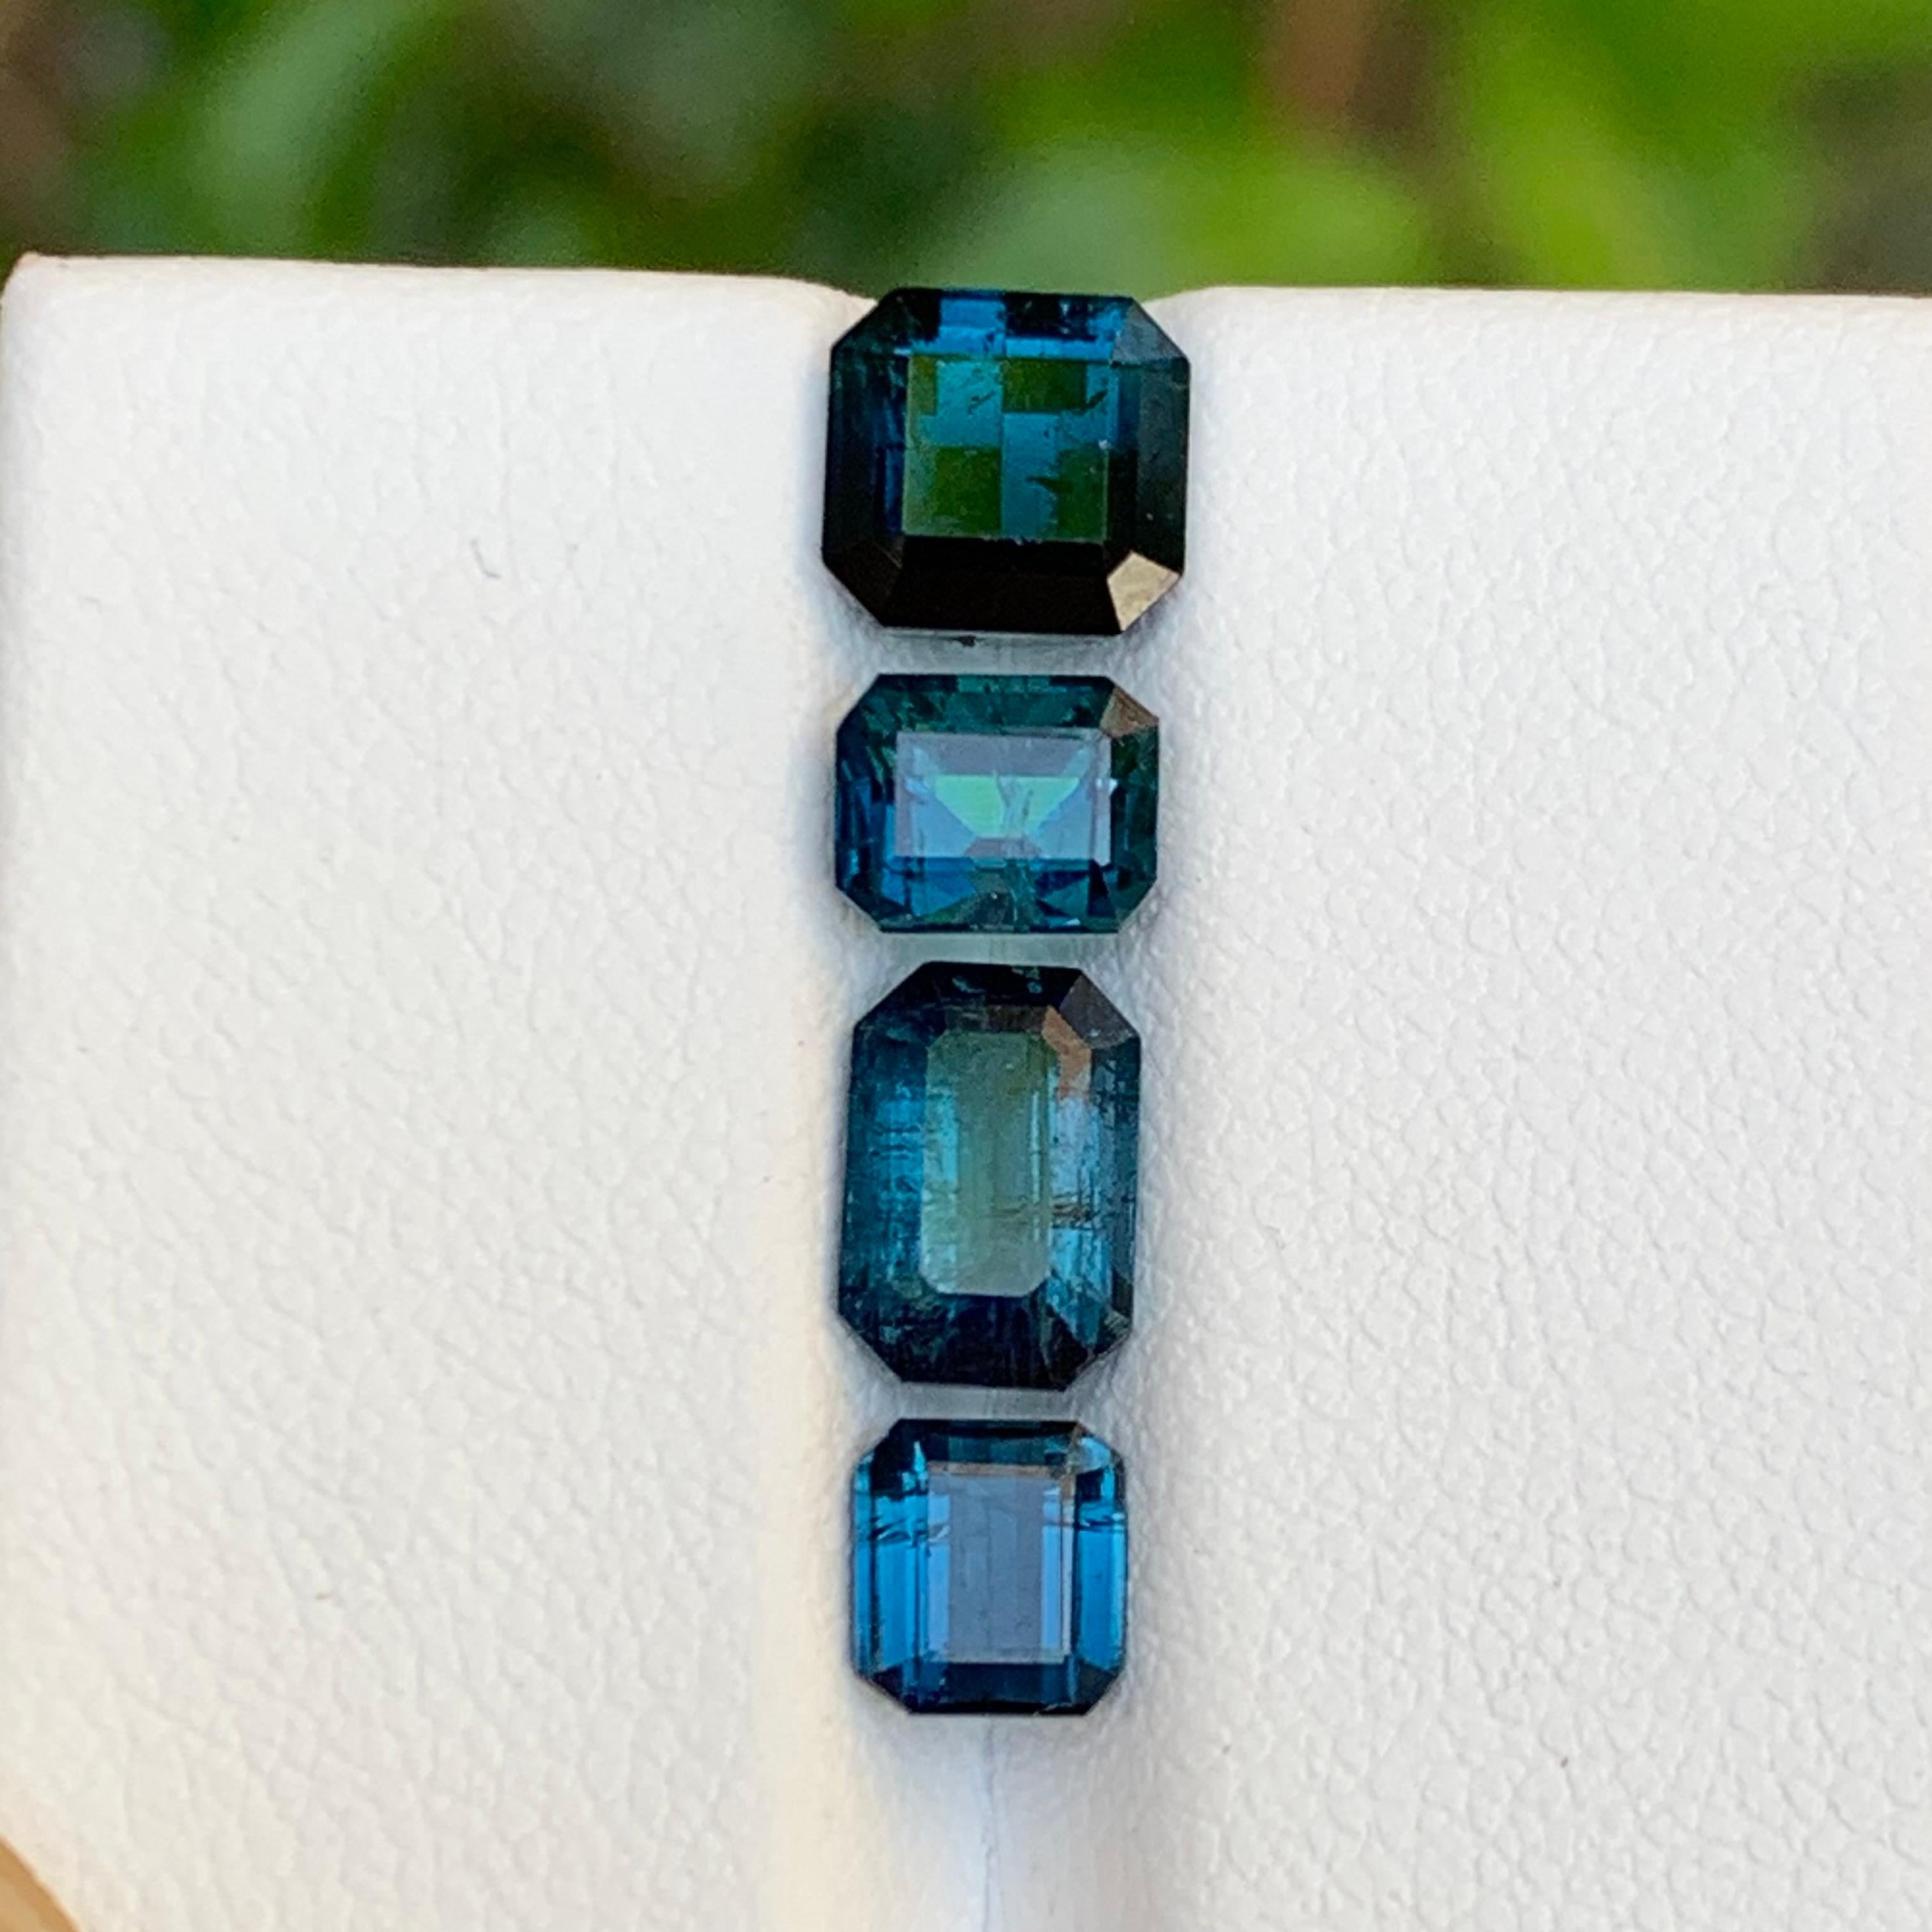 Contemporary Rare Darkish Inky Blue Natural Tourmaline Gemstones Lot, 4.85 Ct for Jewelry For Sale